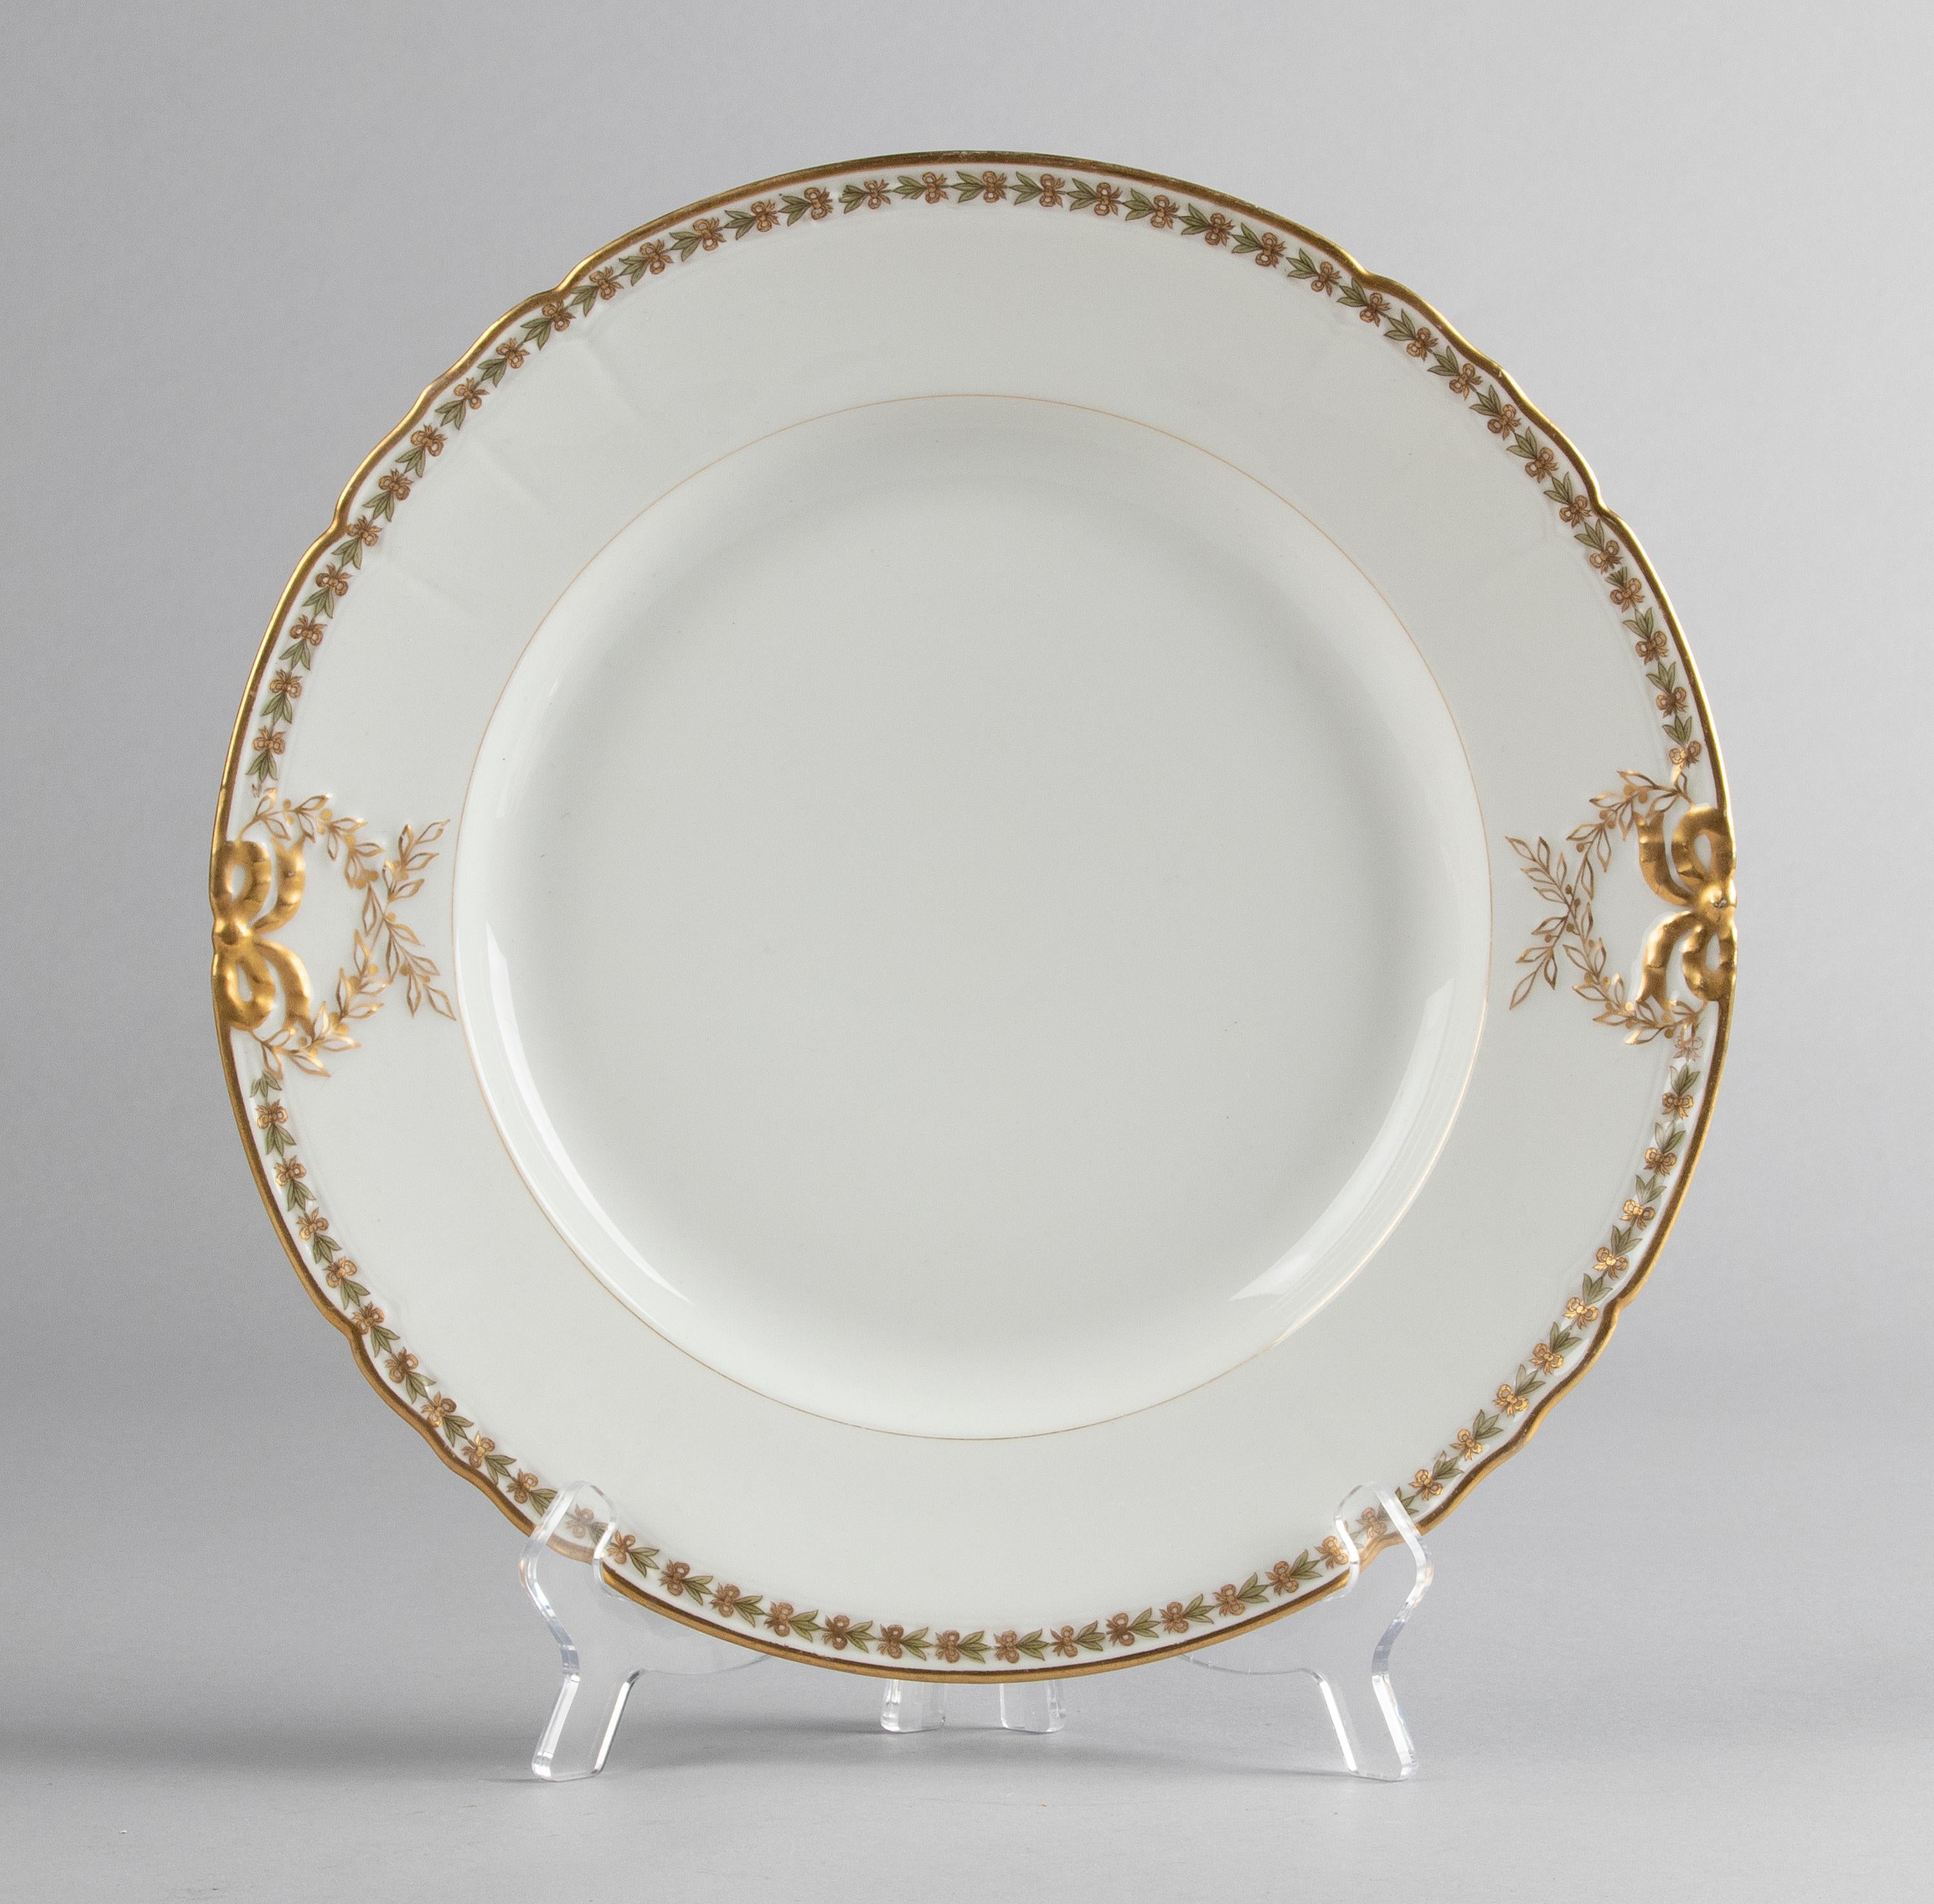 21-Piece Early 20th Century Porcelain Dinner Set Made by Limoges 1